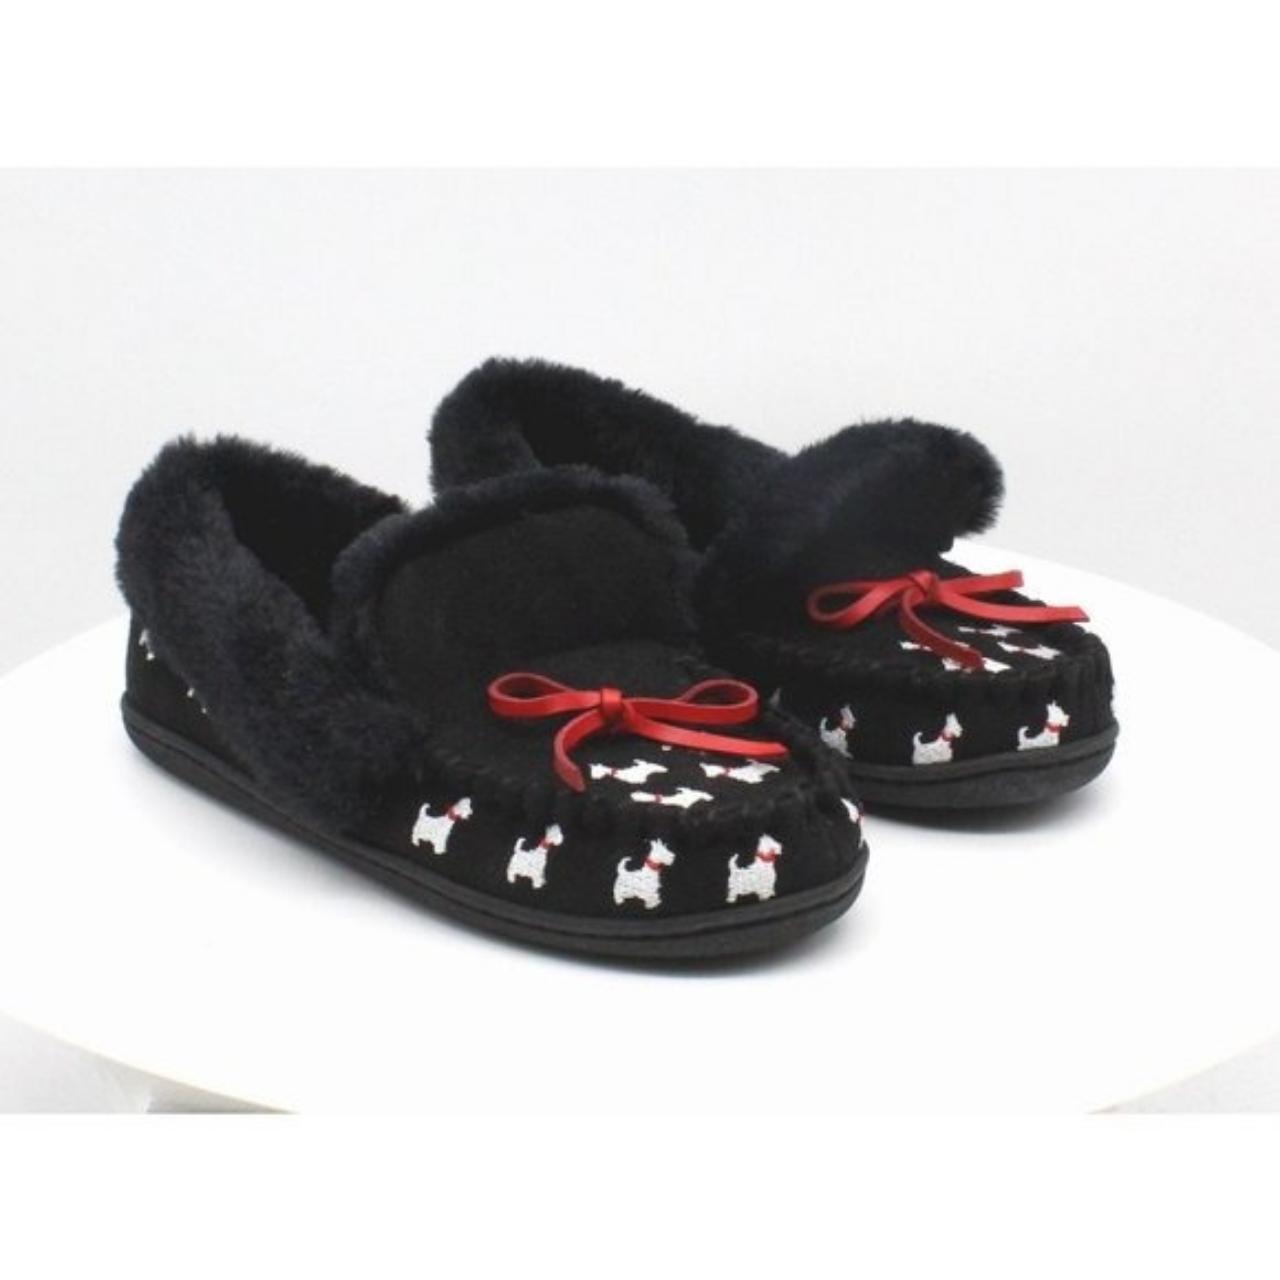 Product Image 1 - Charter Club Dorenda Moccasin Slippers

Help